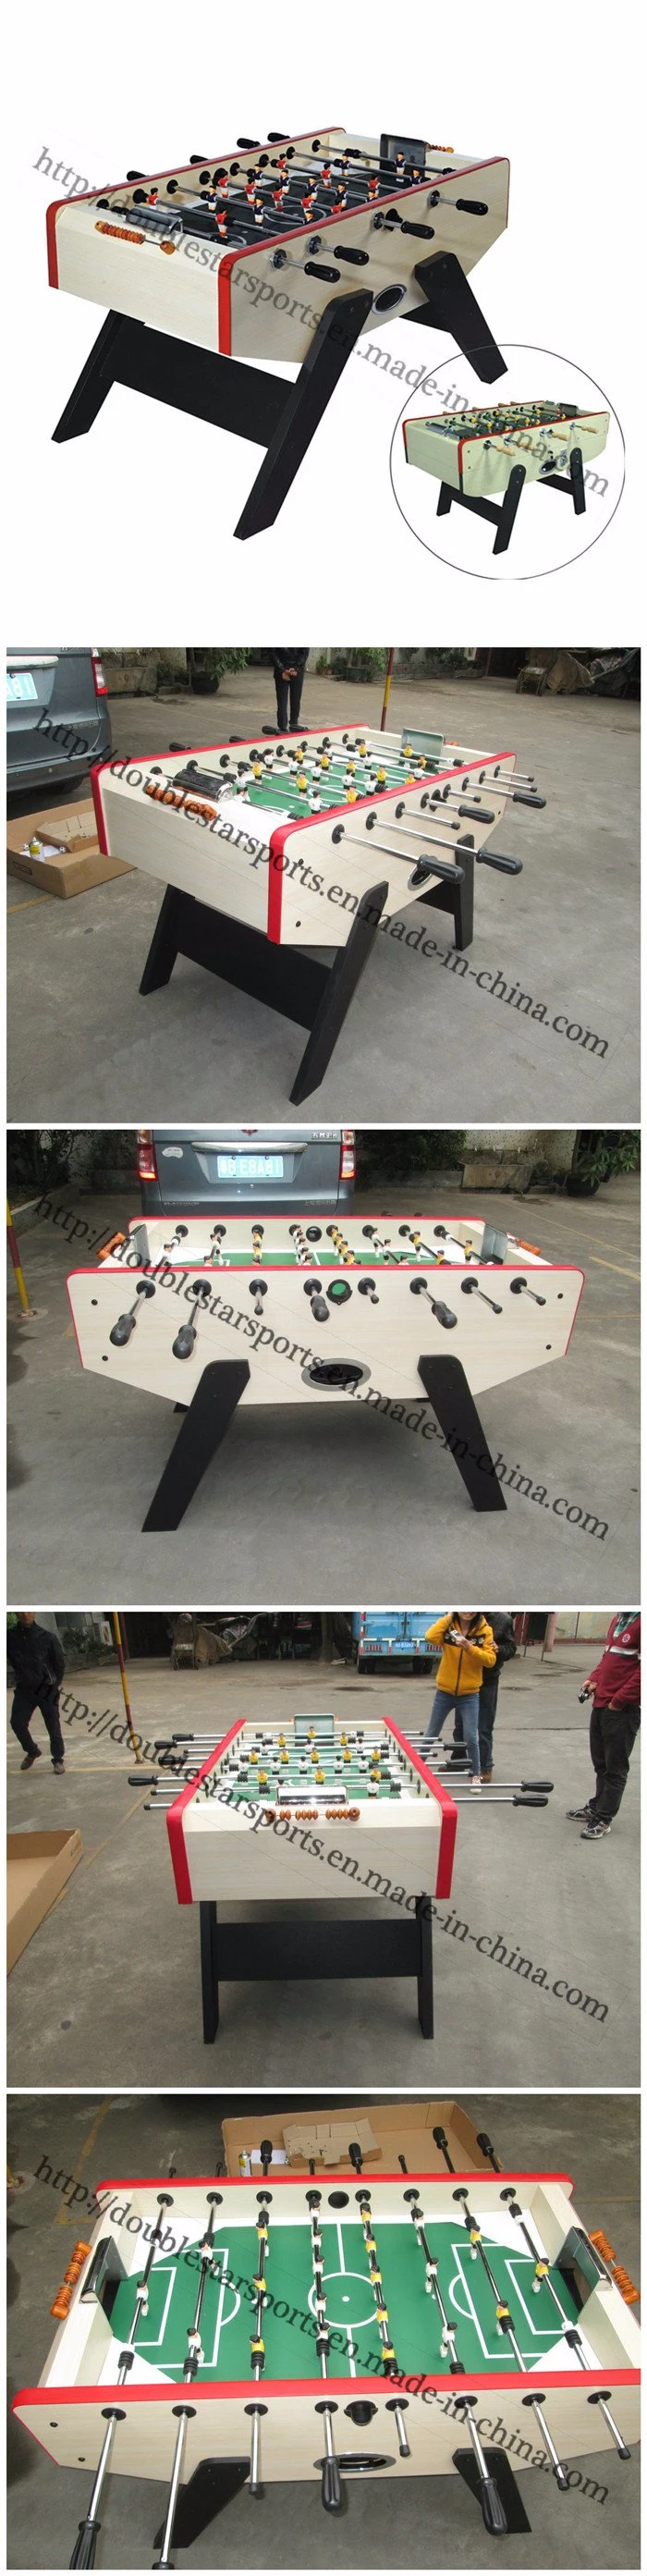 Popular New Soccer Table Baby Football Table Wholesale